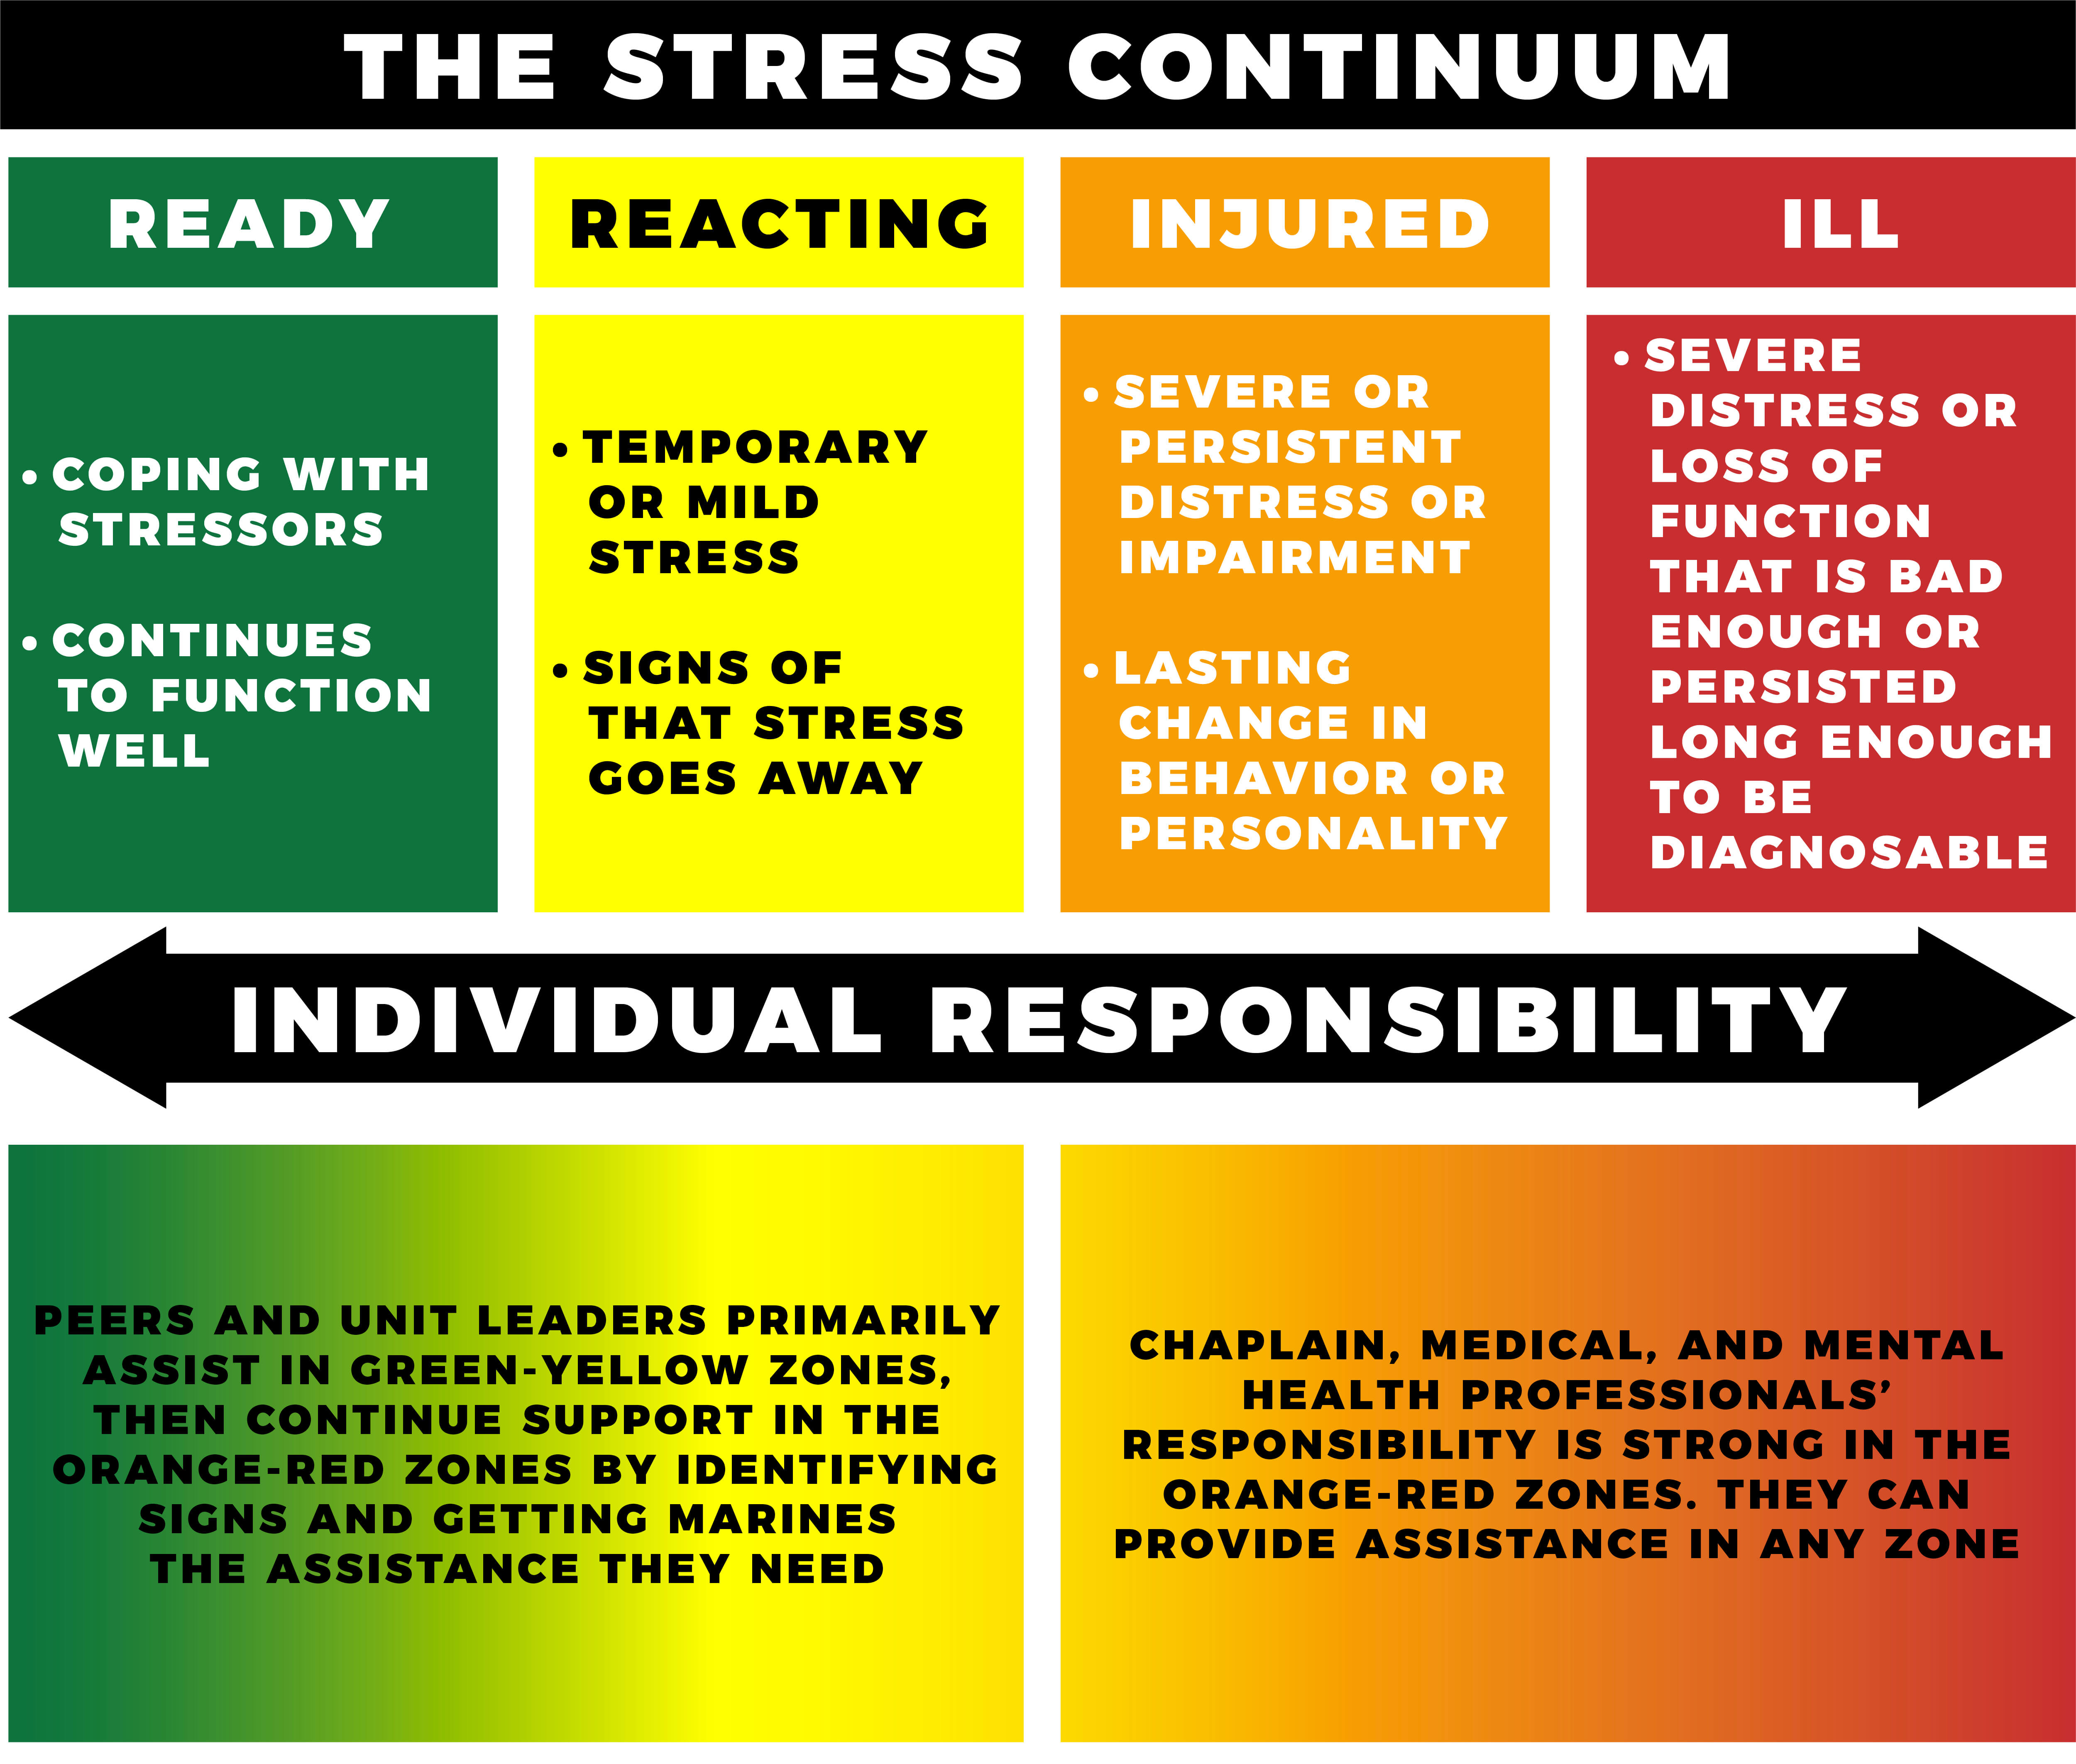 Infographic of The Stress Continuum